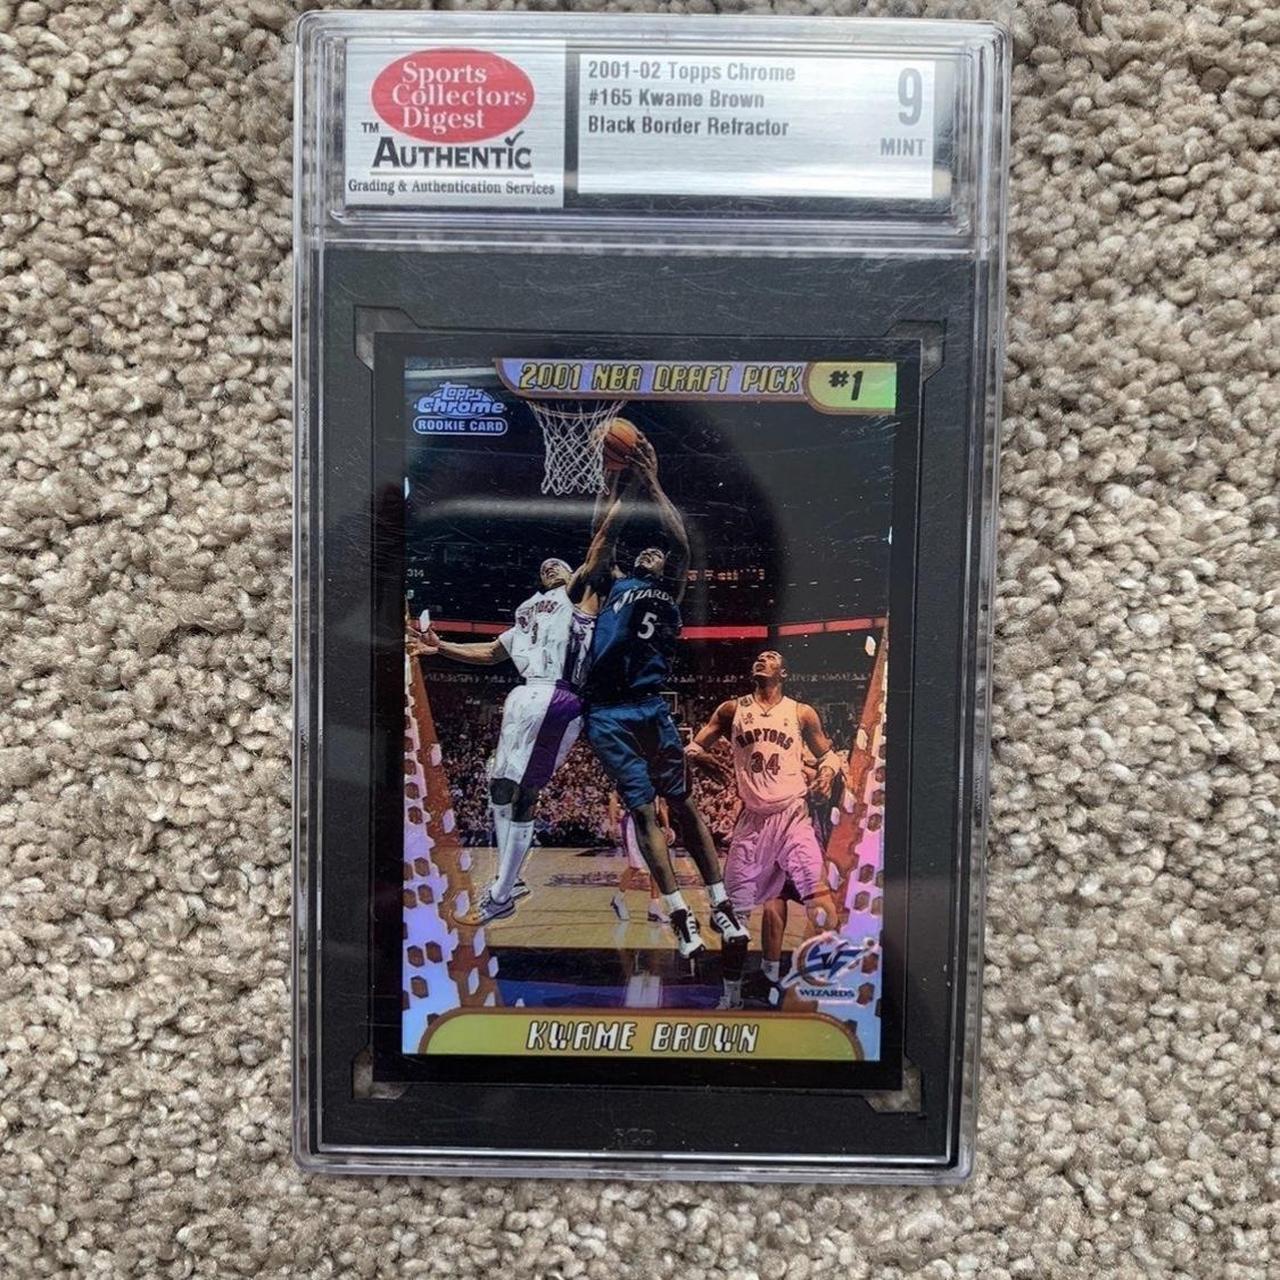 2001 & 2002 Topps Chrome Black Refractor PSA Return: Pierce, McGrady,  Wallace, Kidd, Allen, Stojakovic, Davis. You guys liked my Iverson post so  here are some more early TC Black Refractors! Note